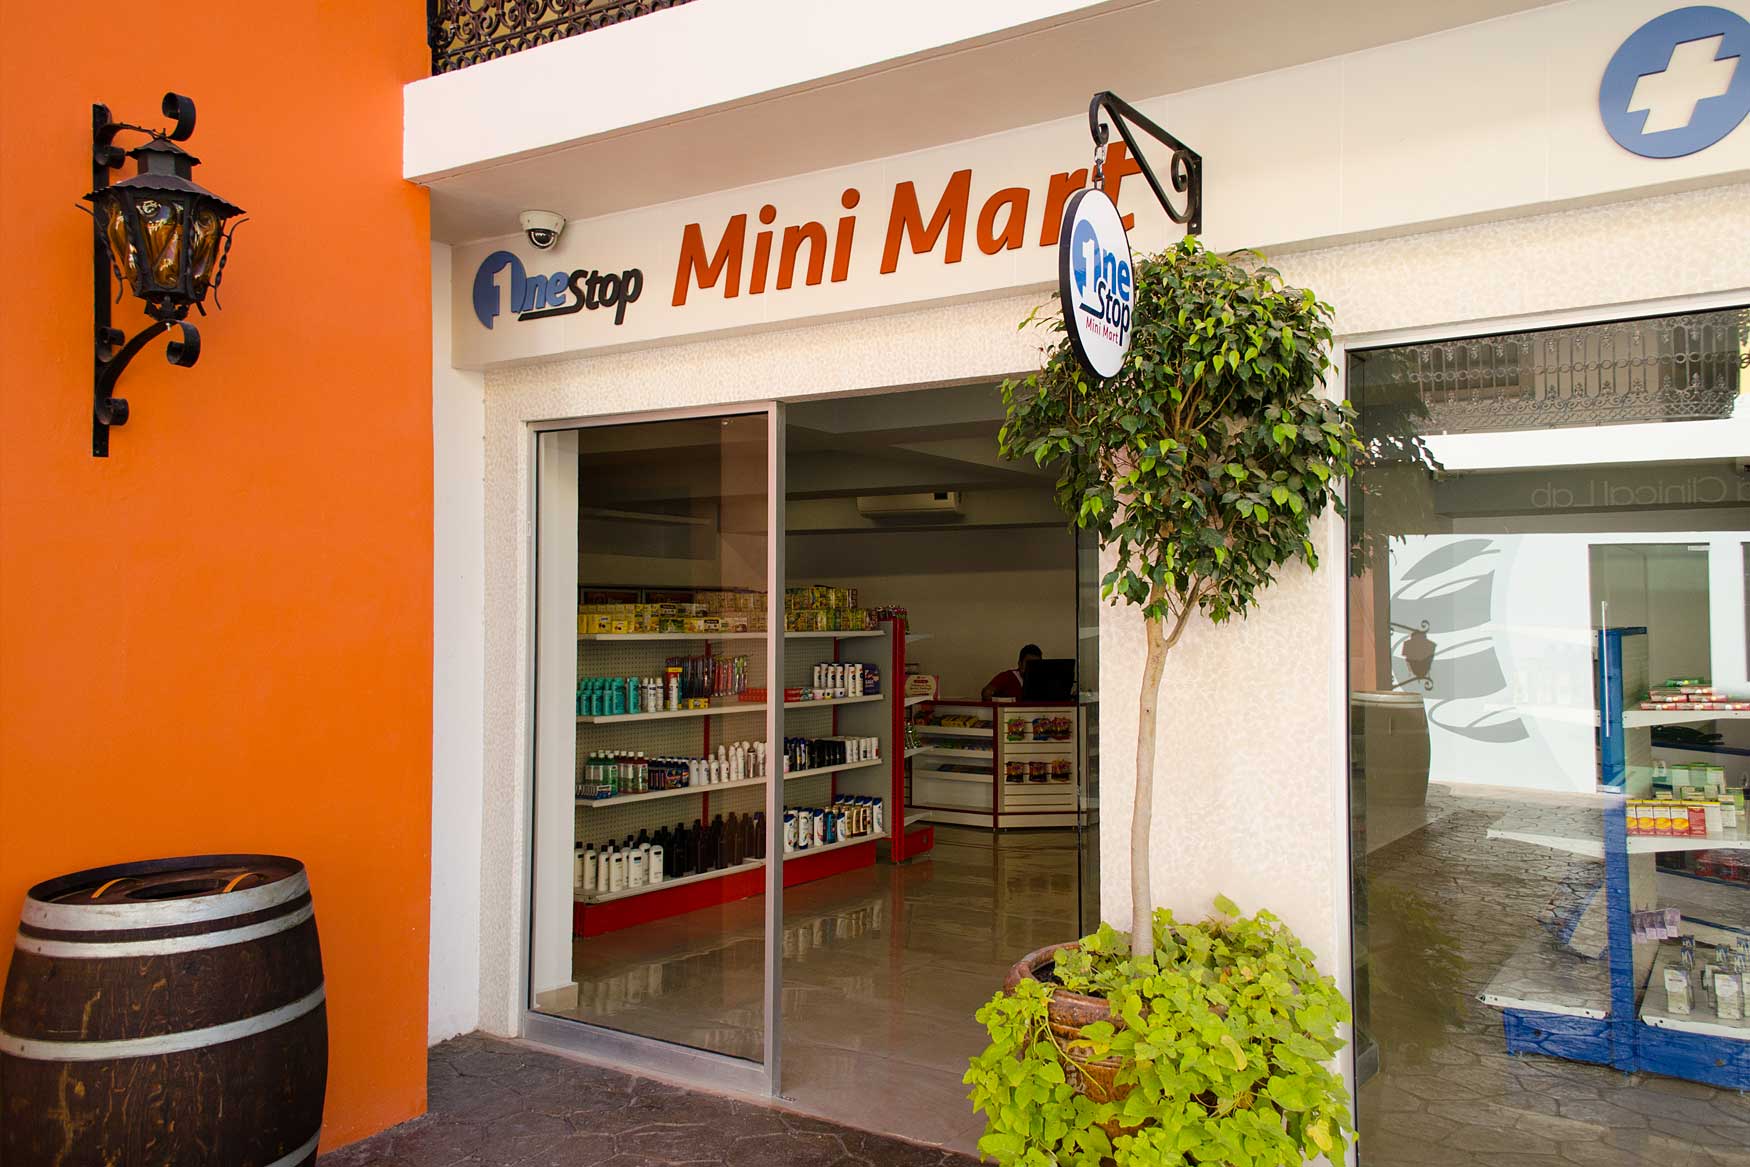 Image from One Stop Mini Mart